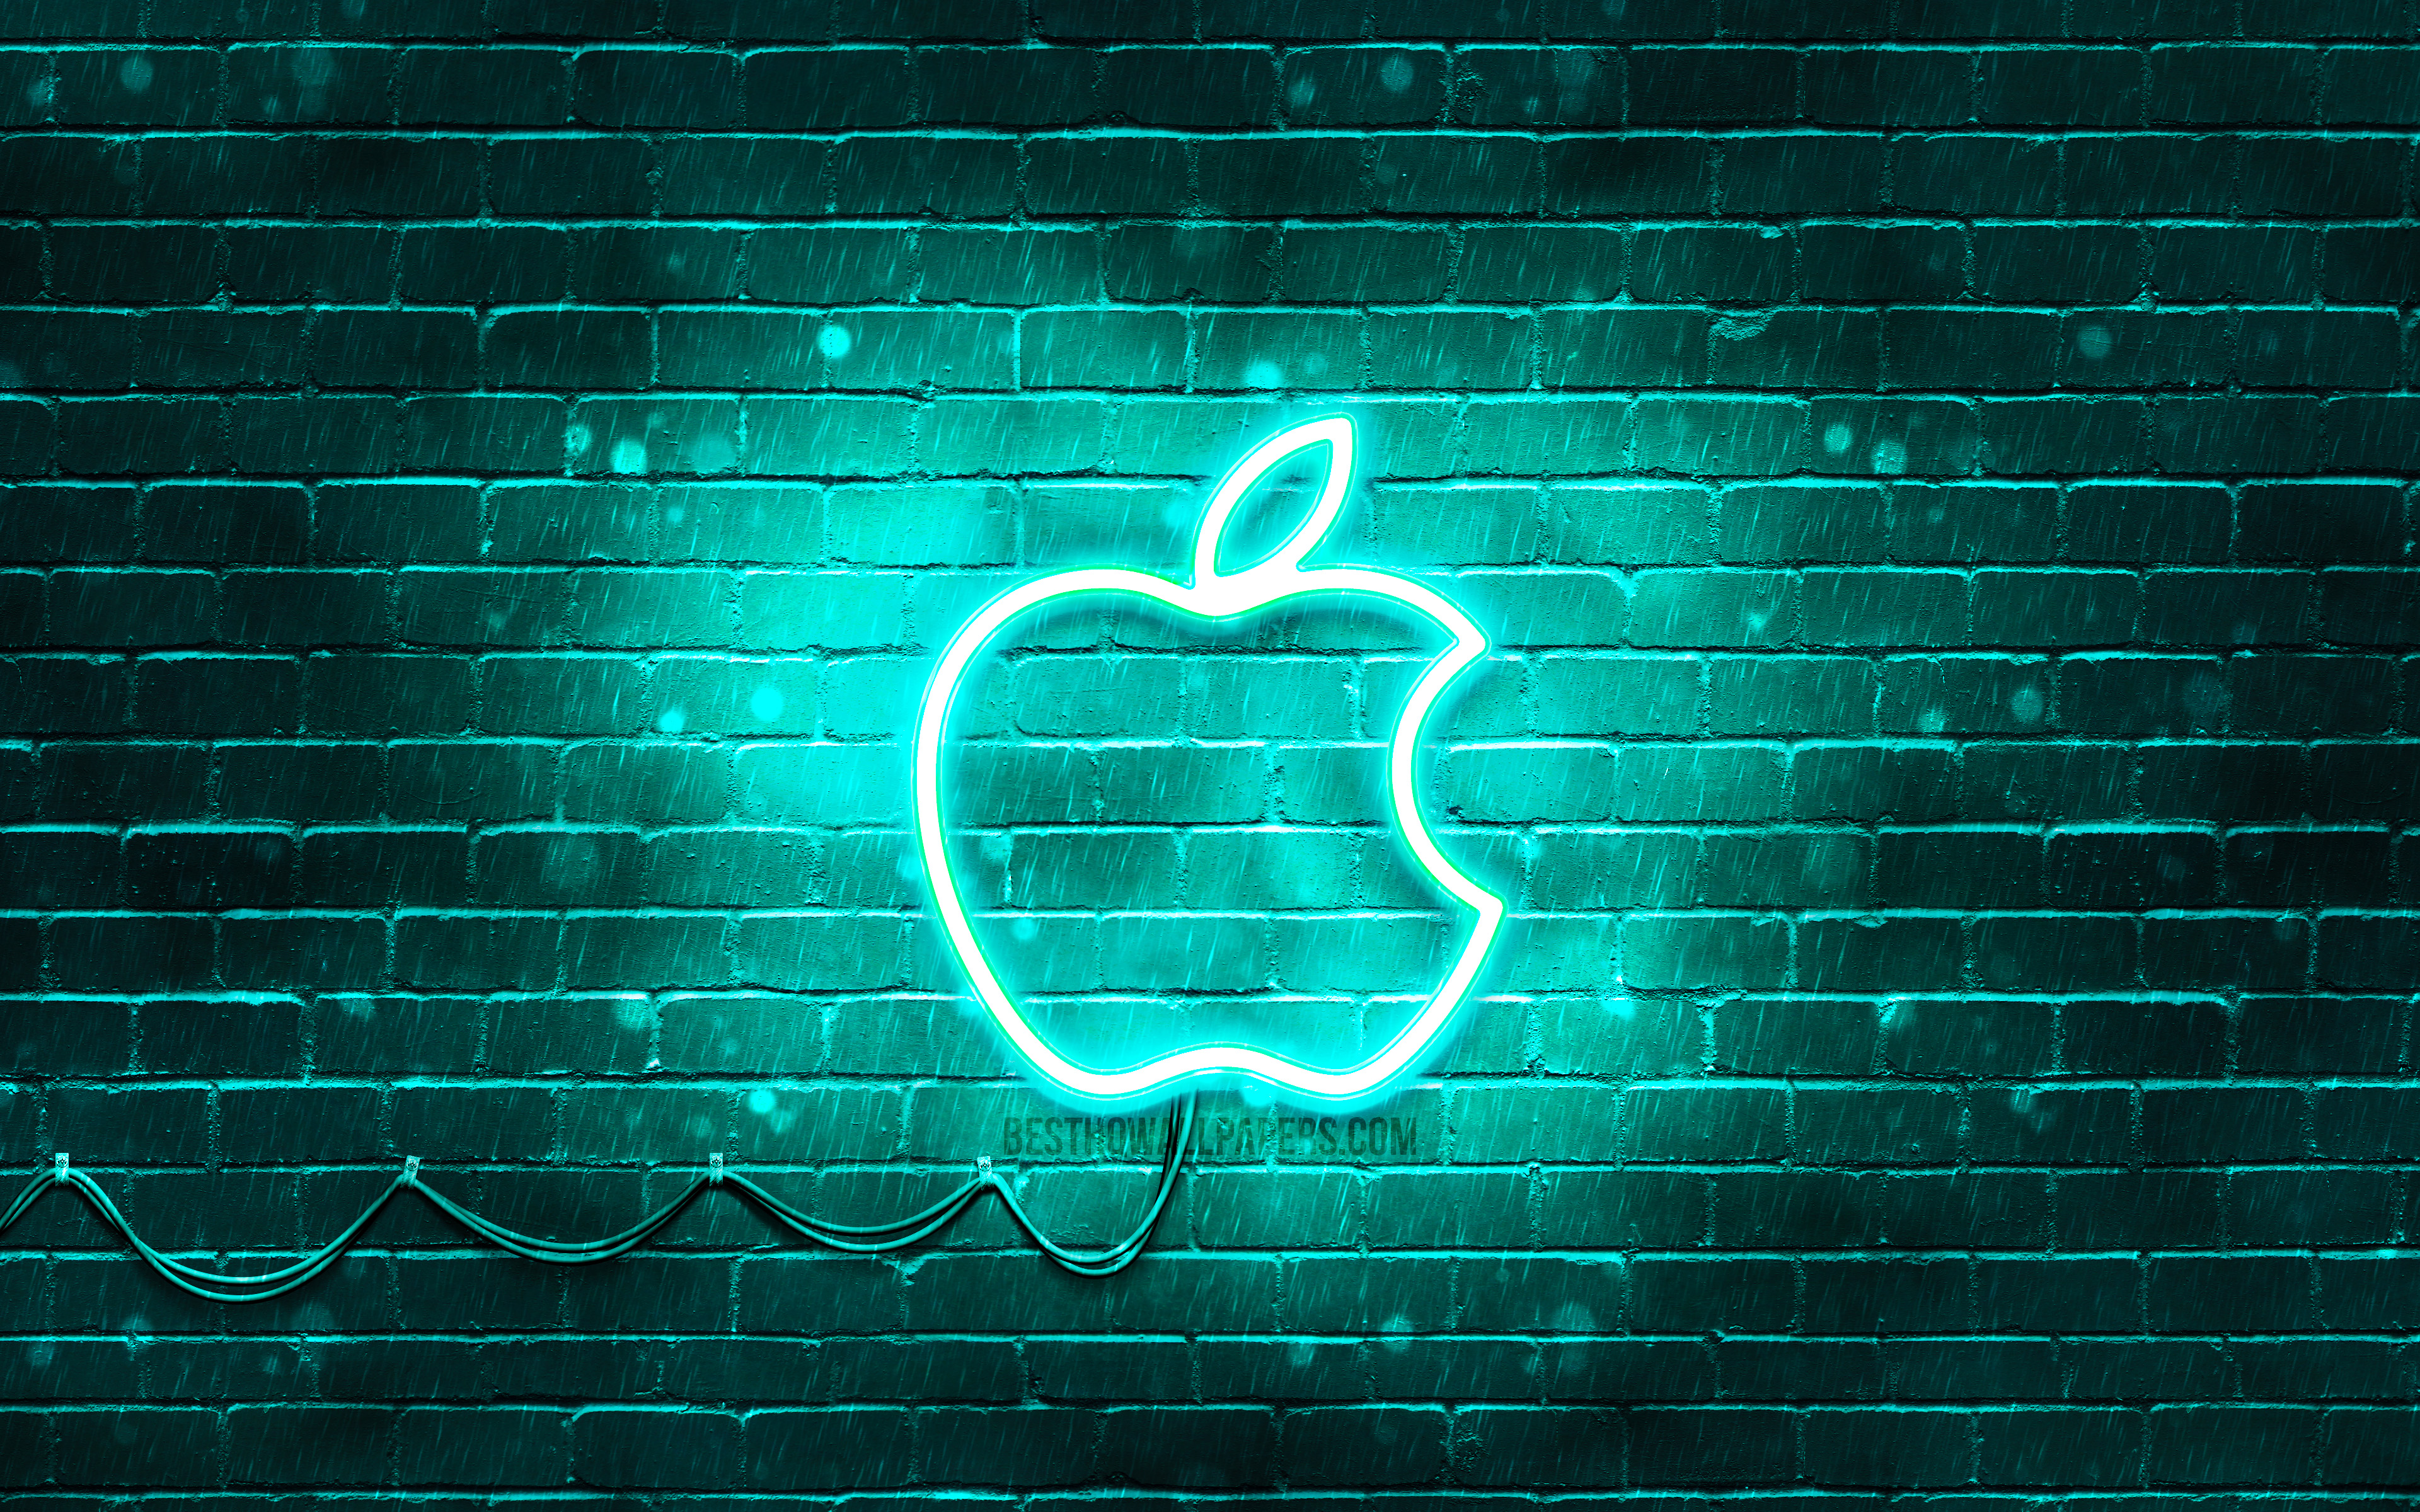 Download wallpaper 4k, Apple turquoise logo, turquoise brickwall, Apple logo, turquoise neon apple, brands, Apple neon logo, Apple for desktop with resolution 3840x2400. High Quality HD picture wallpaper